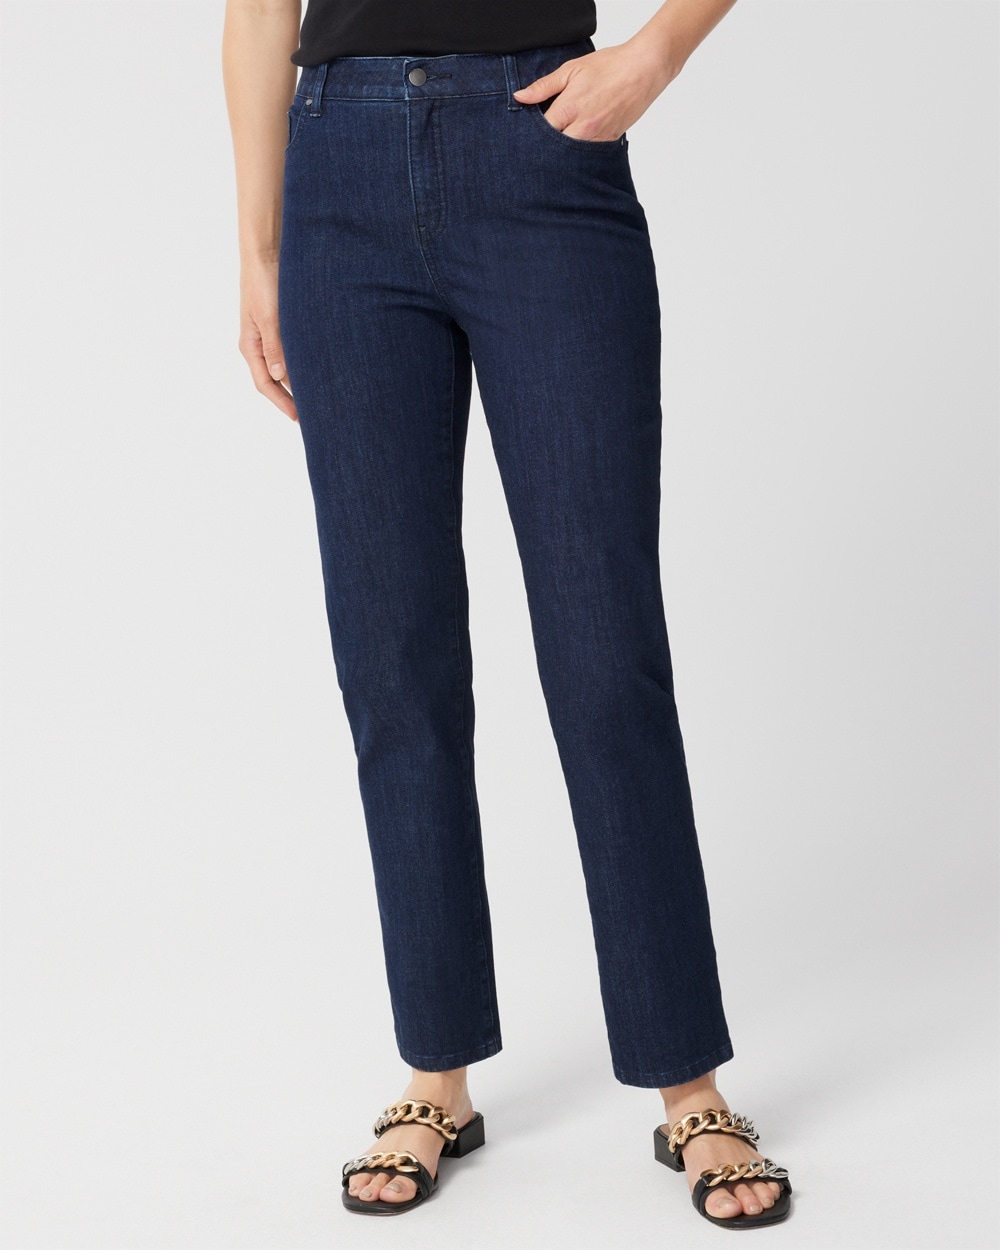 Fabulously Slimming 4-Way-Stretch Straight-Leg Jeans